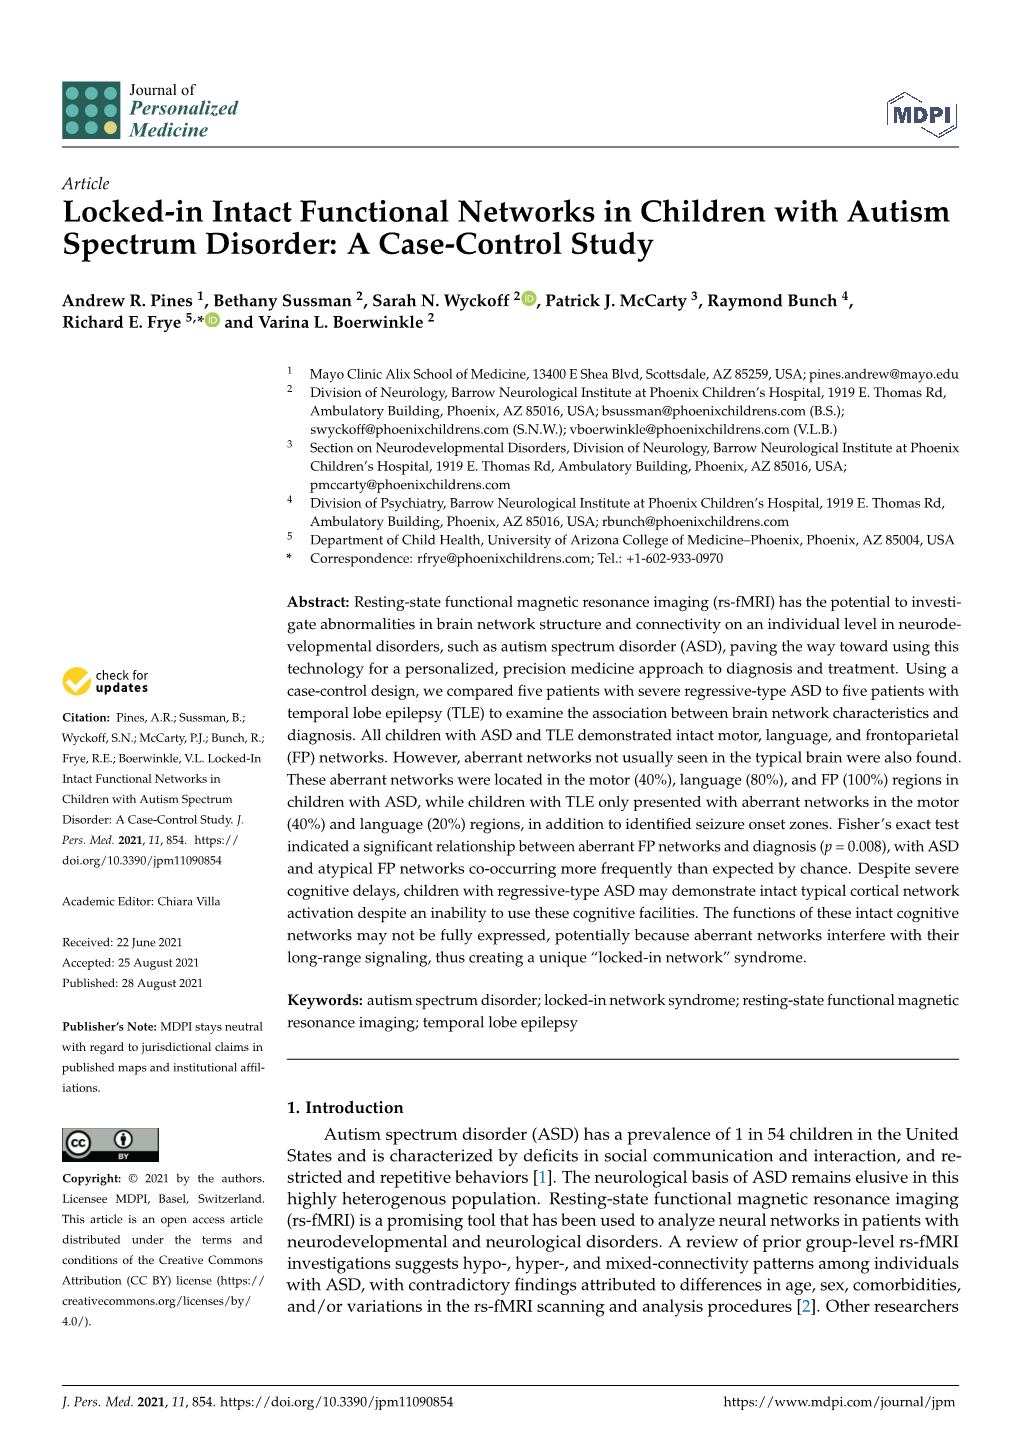 Locked-In Intact Functional Networks in Children with Autism Spectrum Disorder: a Case-Control Study